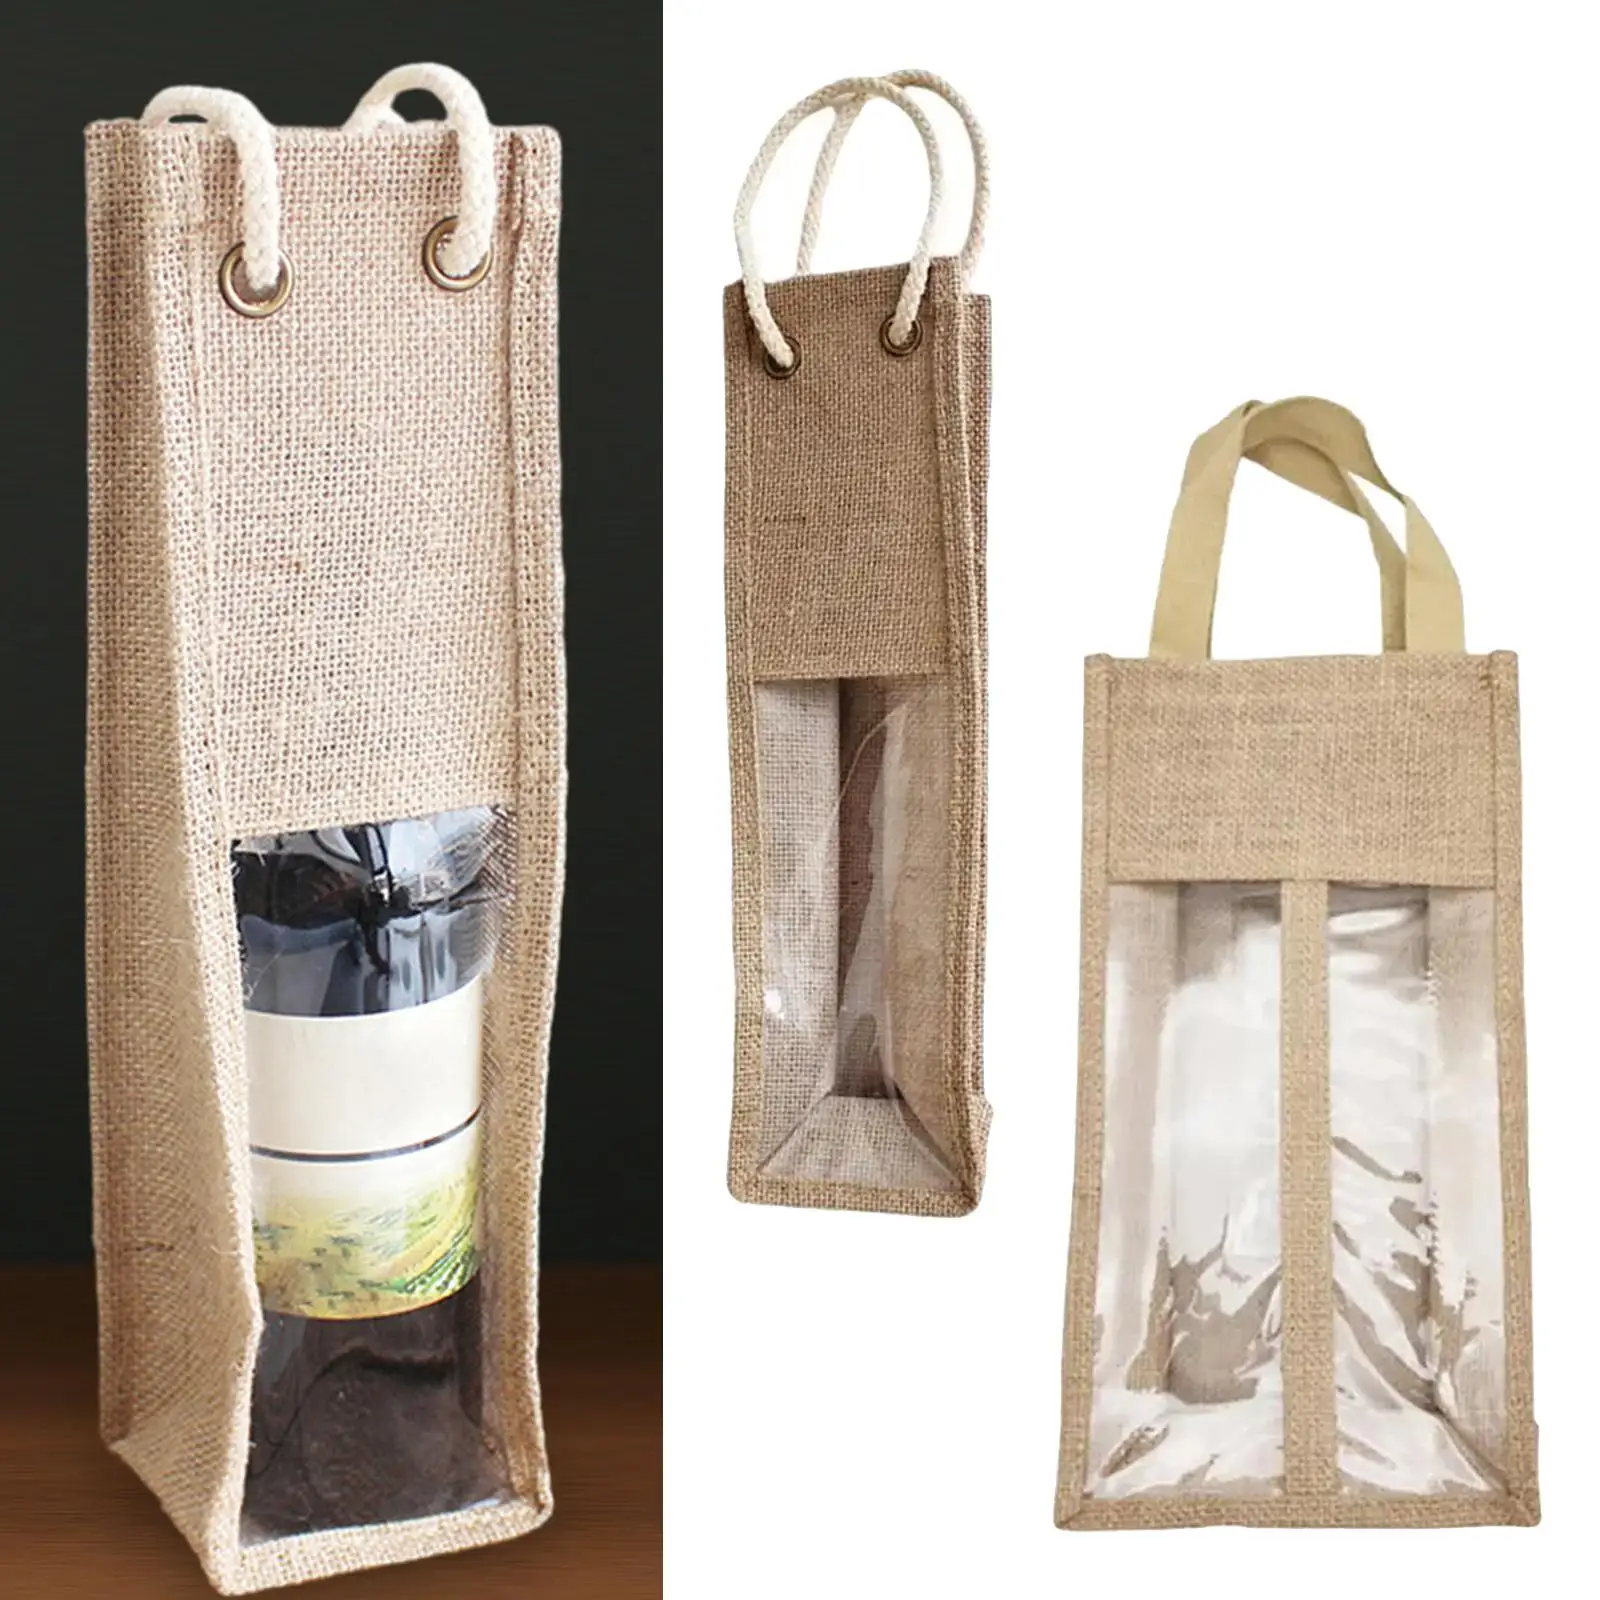 Wine Bottle Covers Handbag with Window and Handle Wine Carrier Wine Bottle Bag for Holiday Birthday Winter Wedding Table Dinner